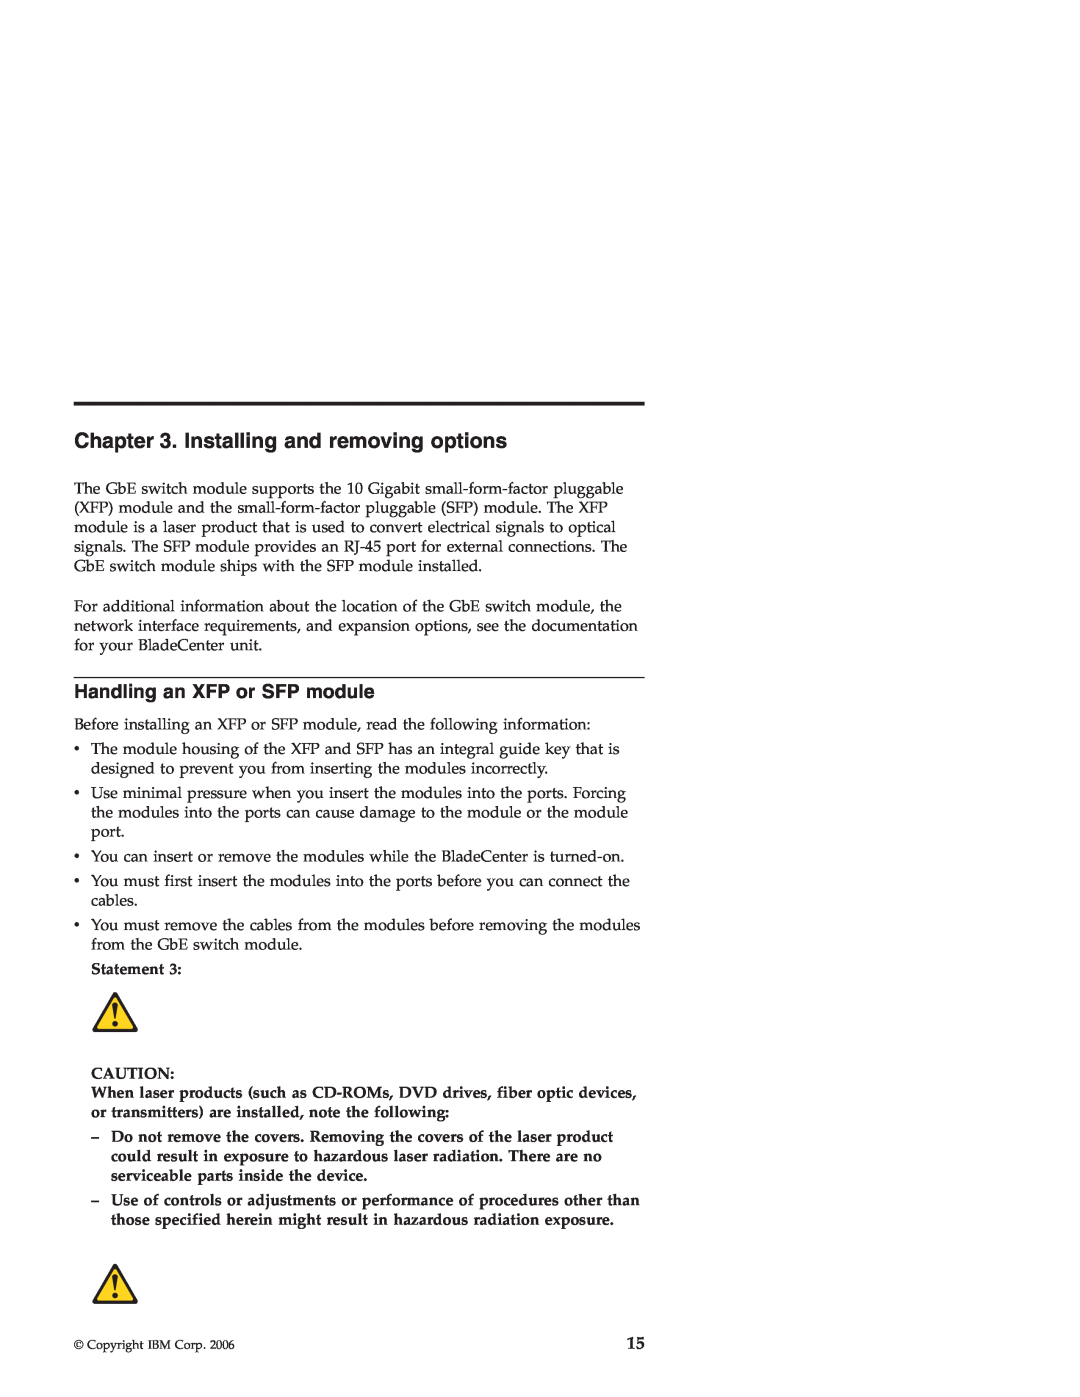 IBM Nortel 10 manual Installing and removing options, Handling an XFP or SFP module, Statement 